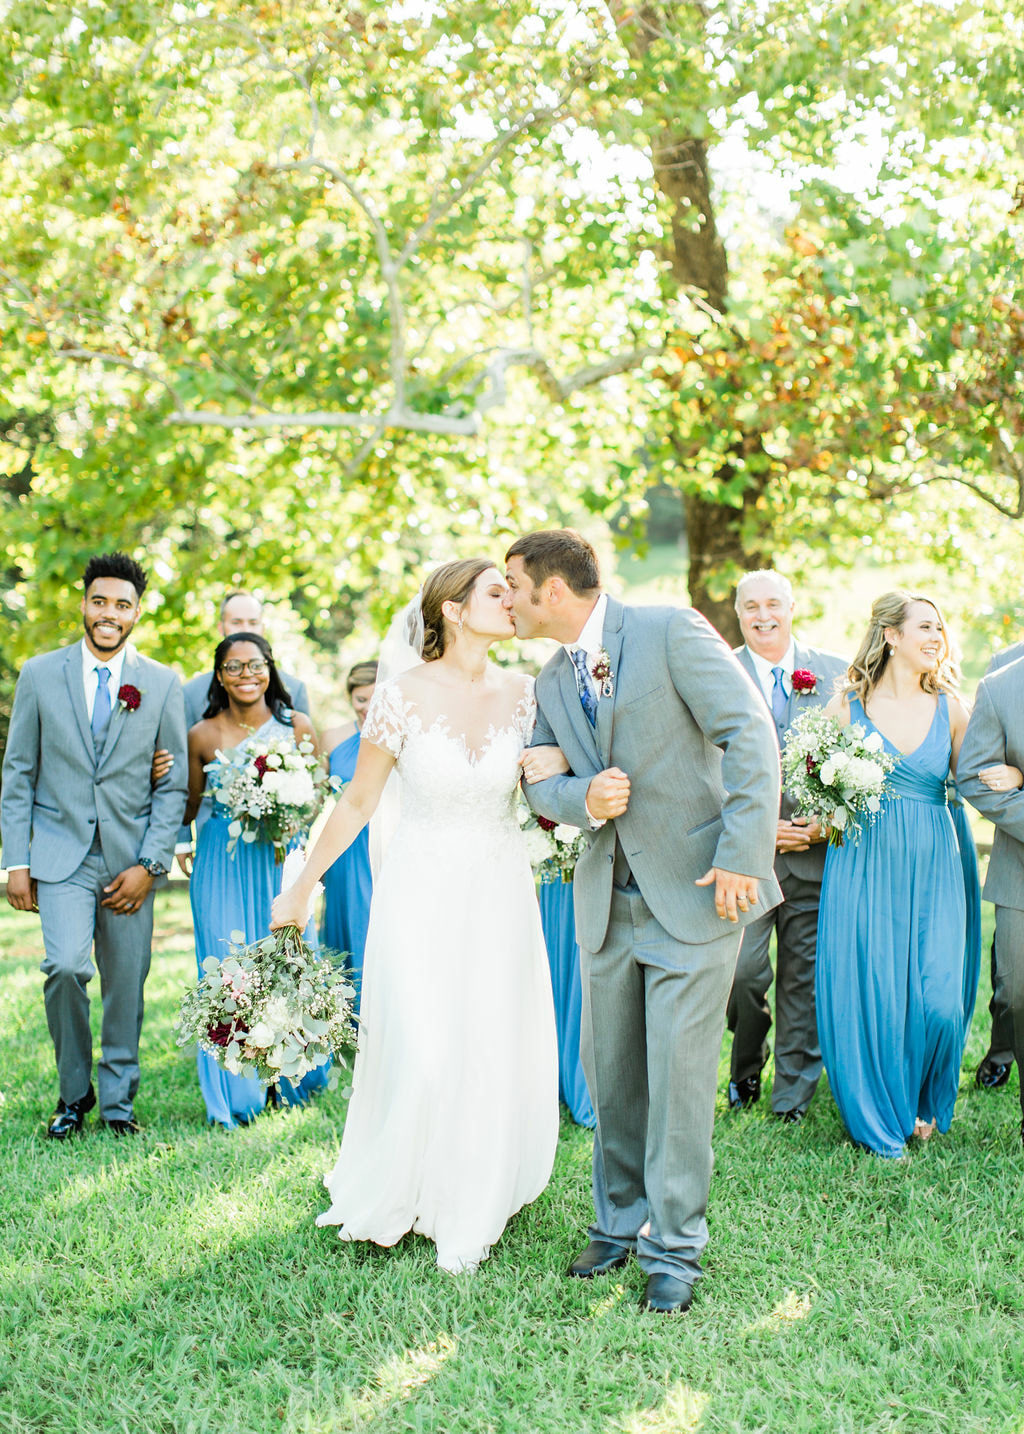 SARAH AND MATTHEW (ANNIE TIMMONS PHOTOGRAPHY)